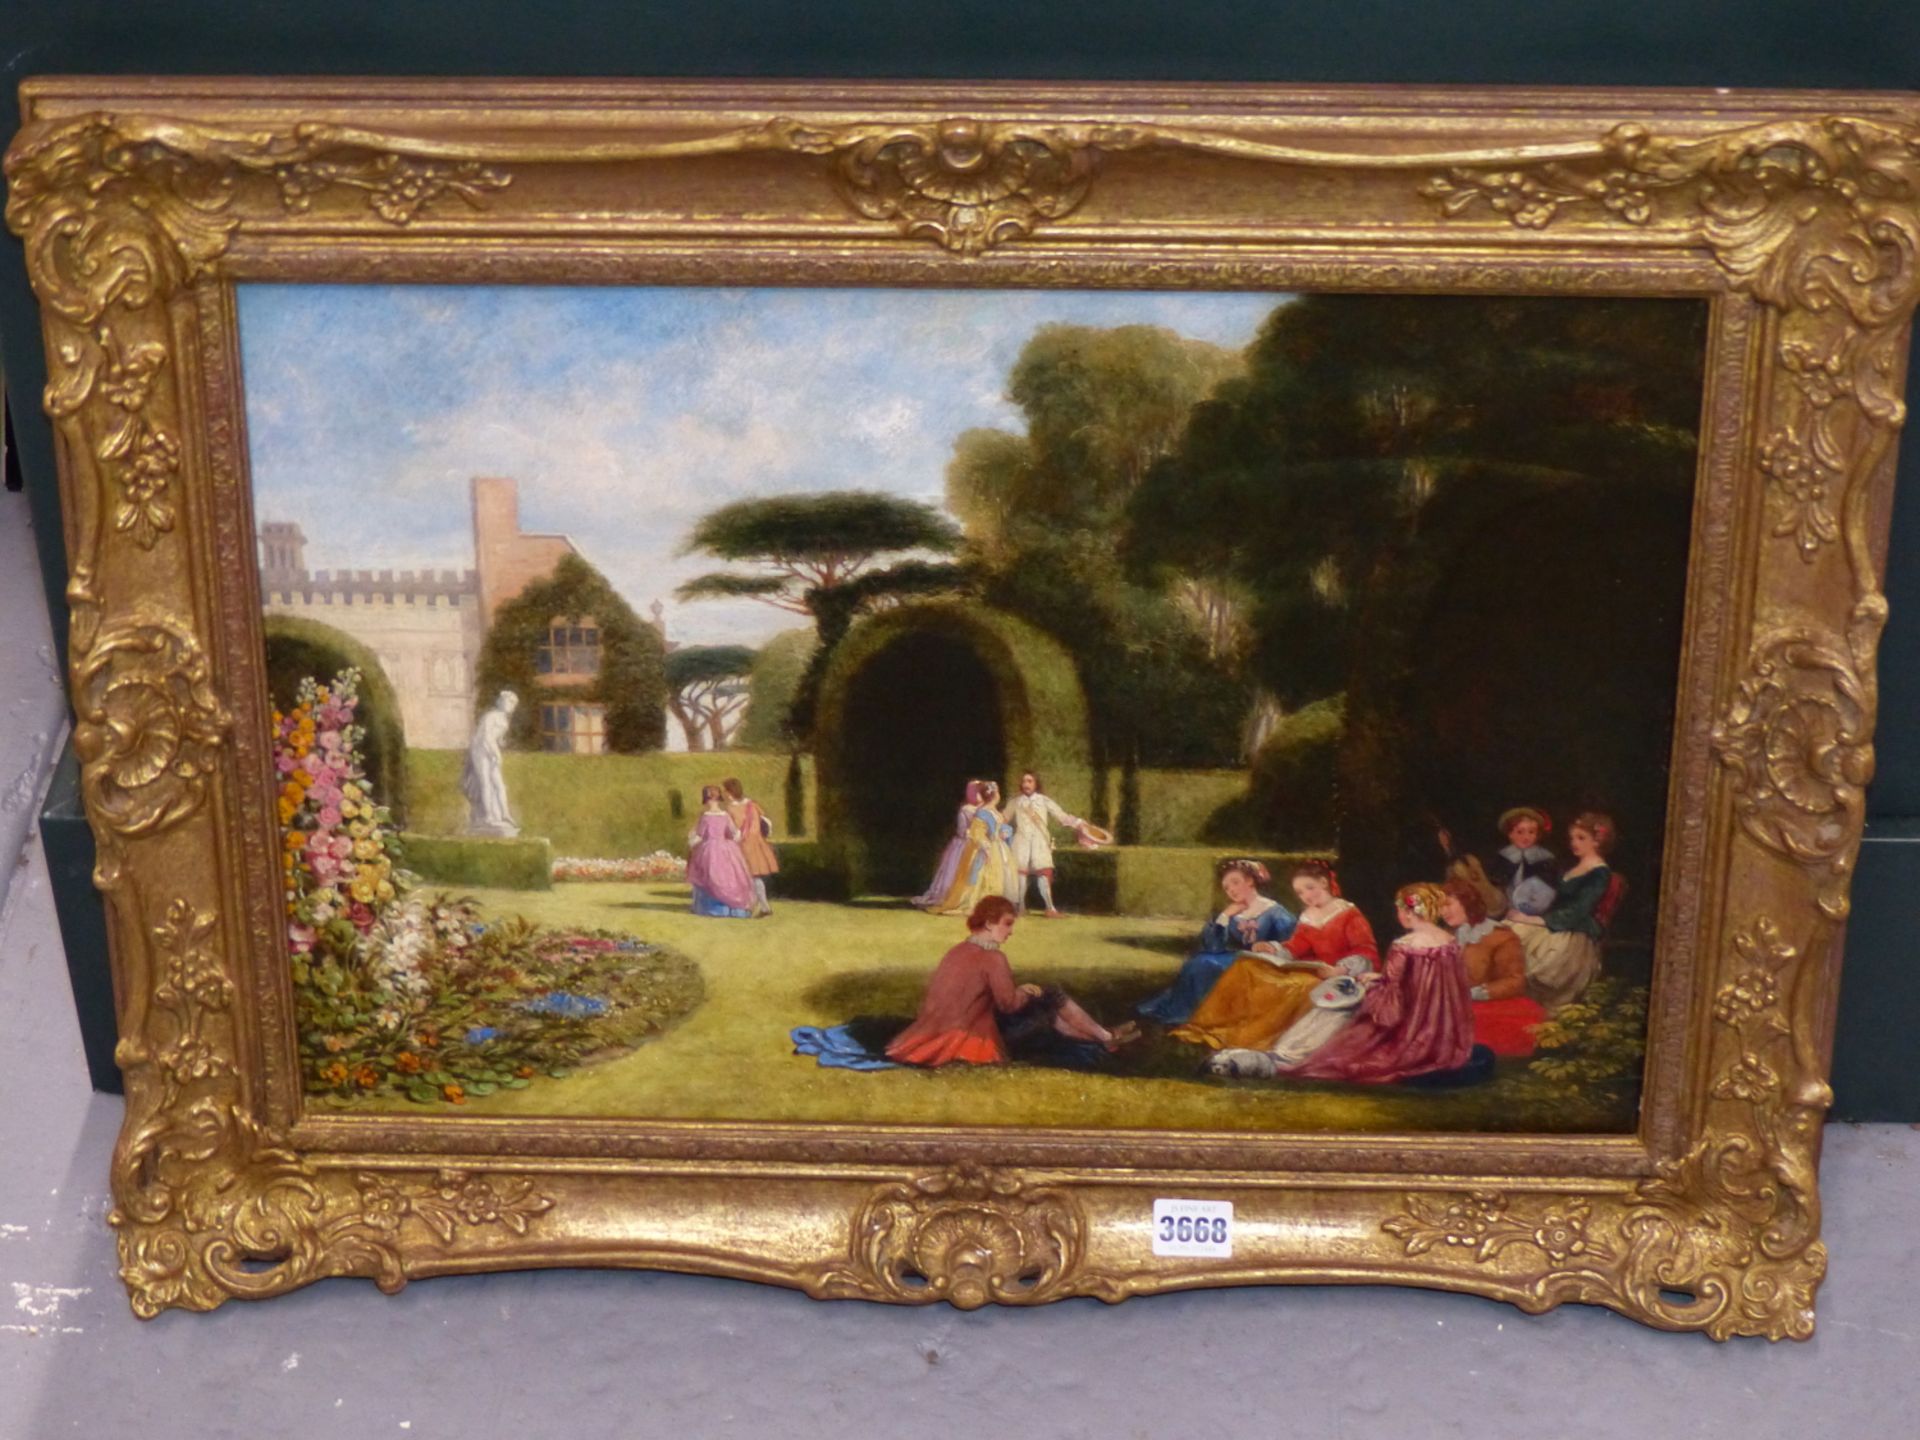 J.D.W. (19TH CENTURY) "FINDING SHADE ON A SUMMERS DAY". OIL ON CANVAS. INITIALLED AND DATED 1868 L/ - Image 3 of 4